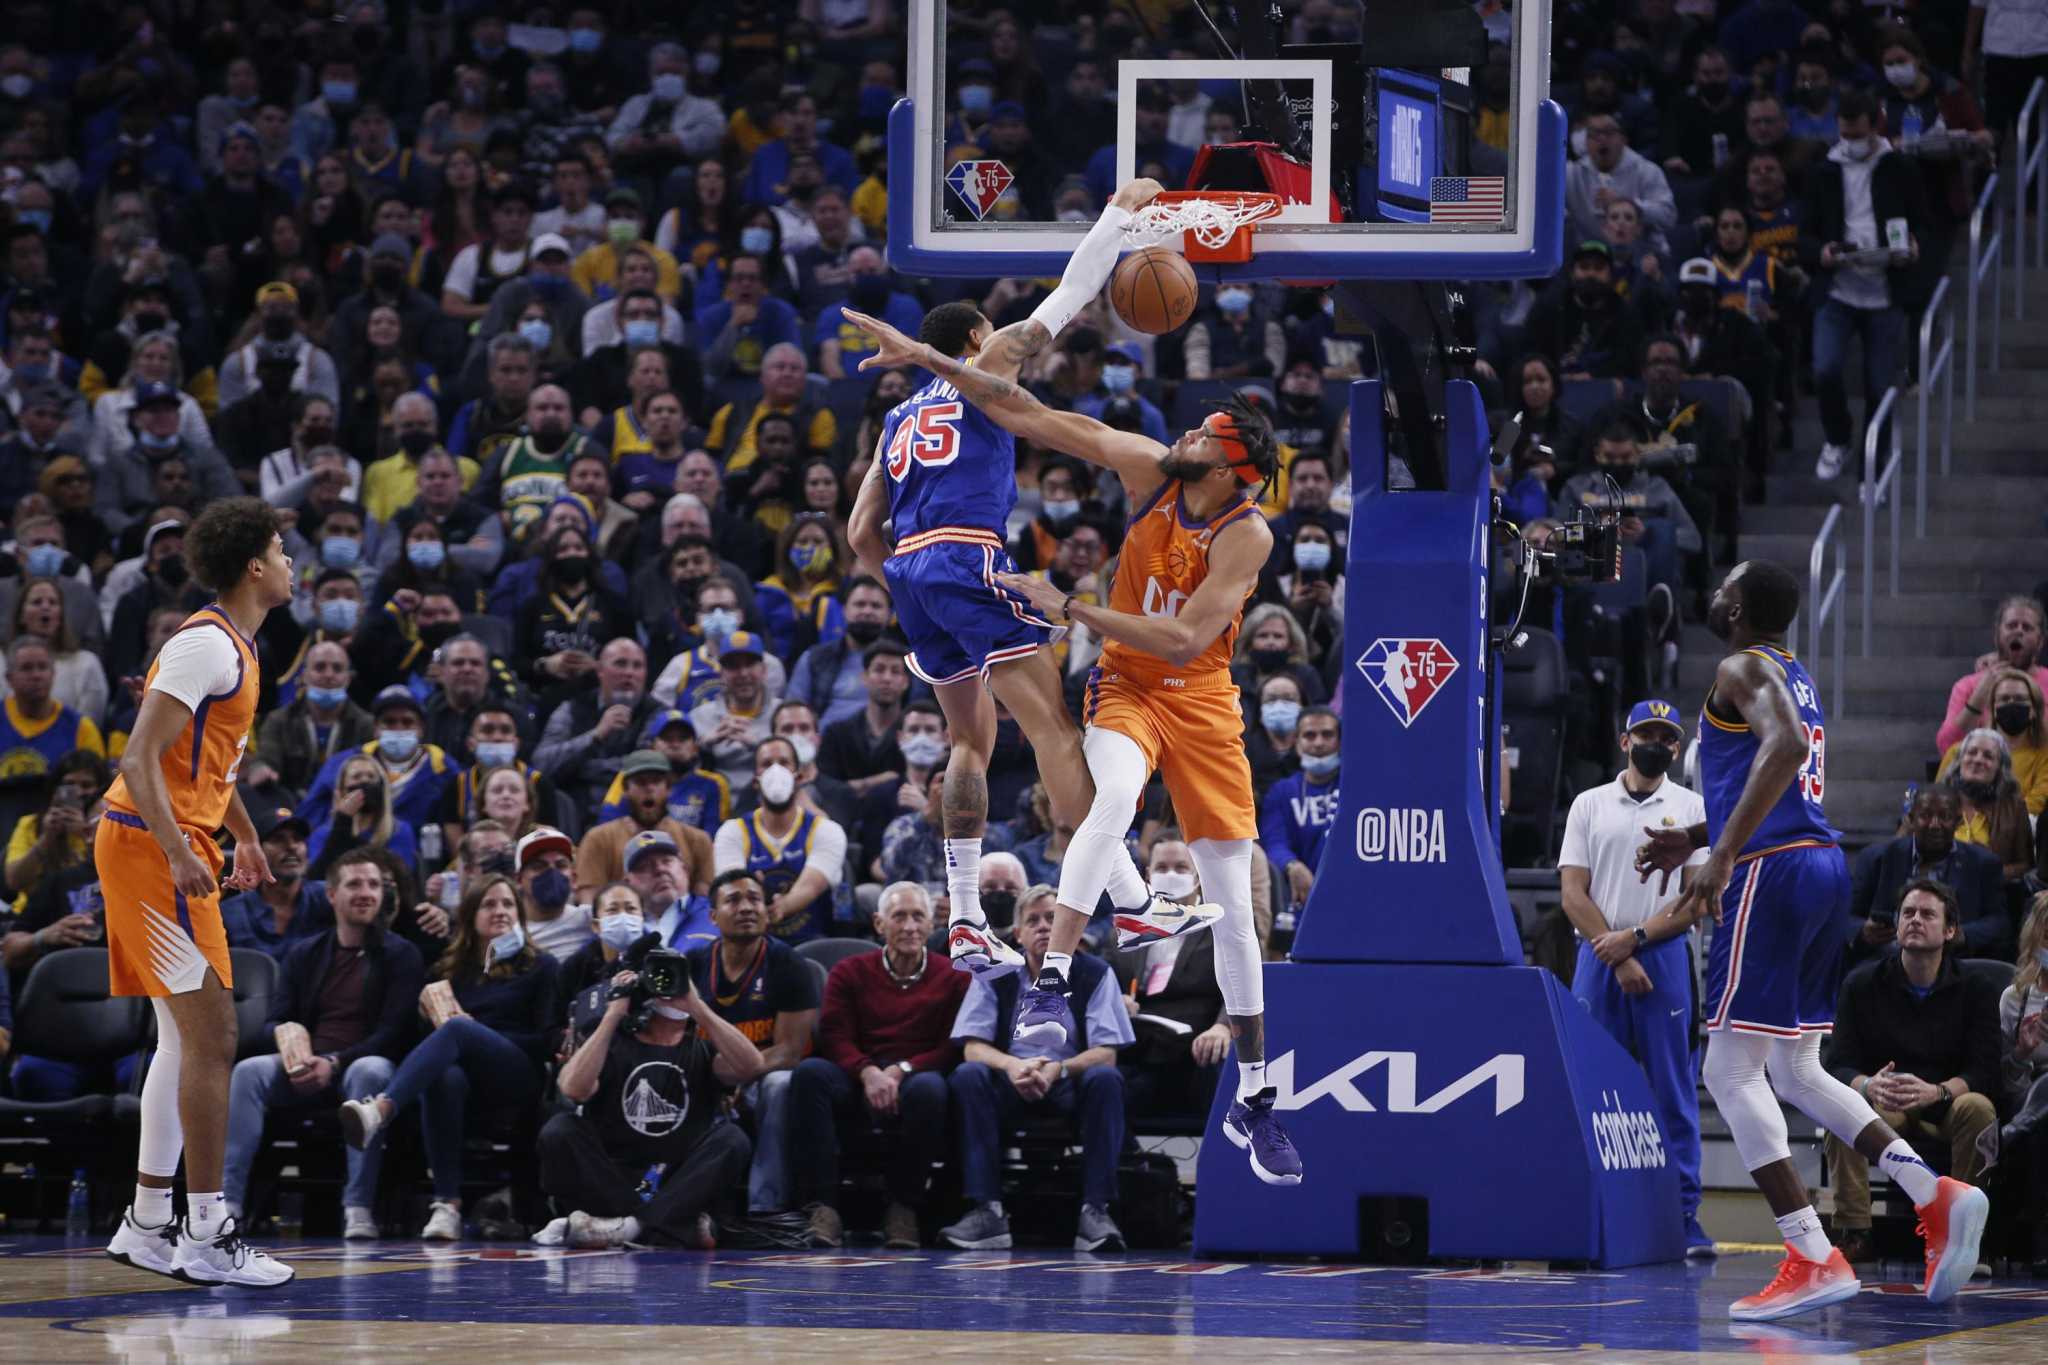 Report: Warriors' Juan Toscano-Anderson to compete in NBA dunk contest